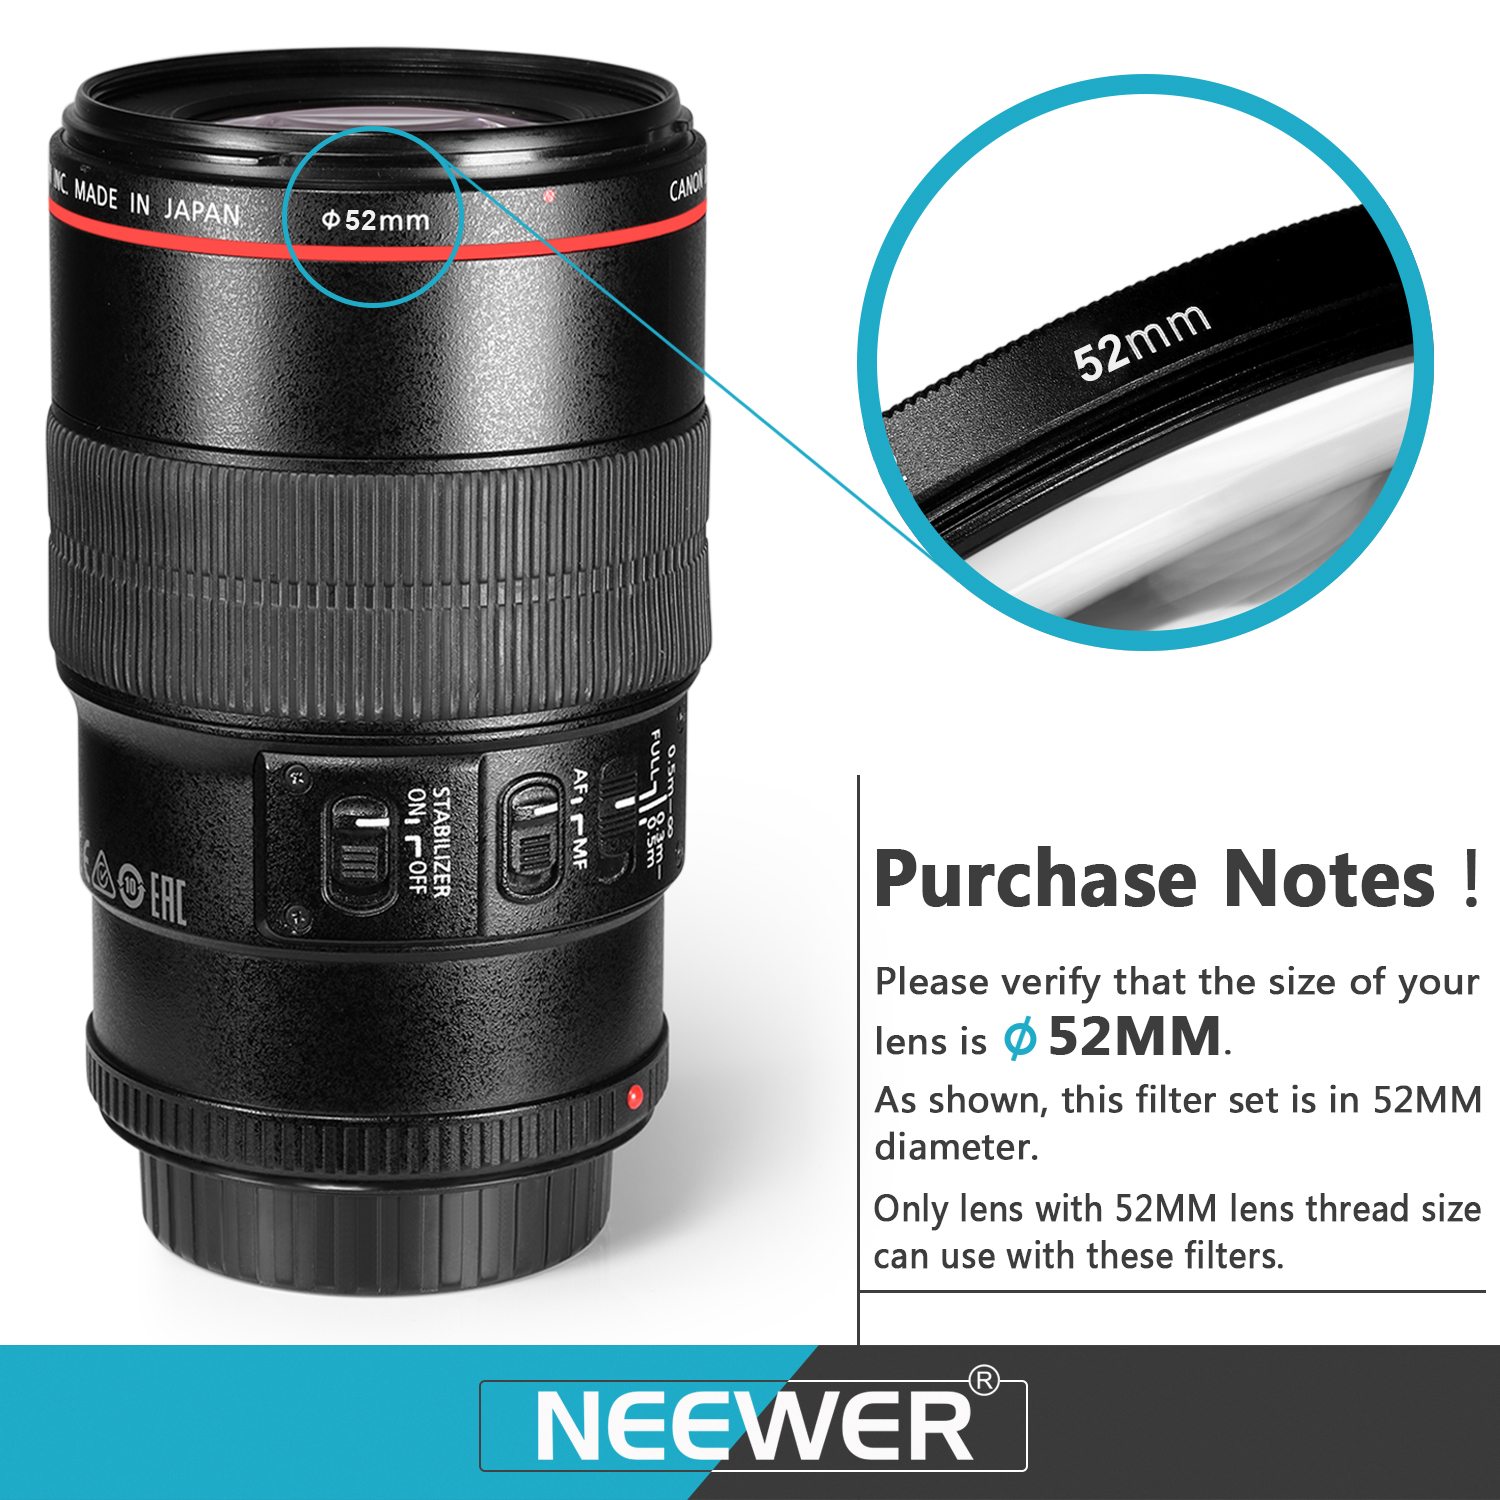 Neewer 52MM Professional UV CPL FLD Lens Filter and Close-Up (+1, +2 ...